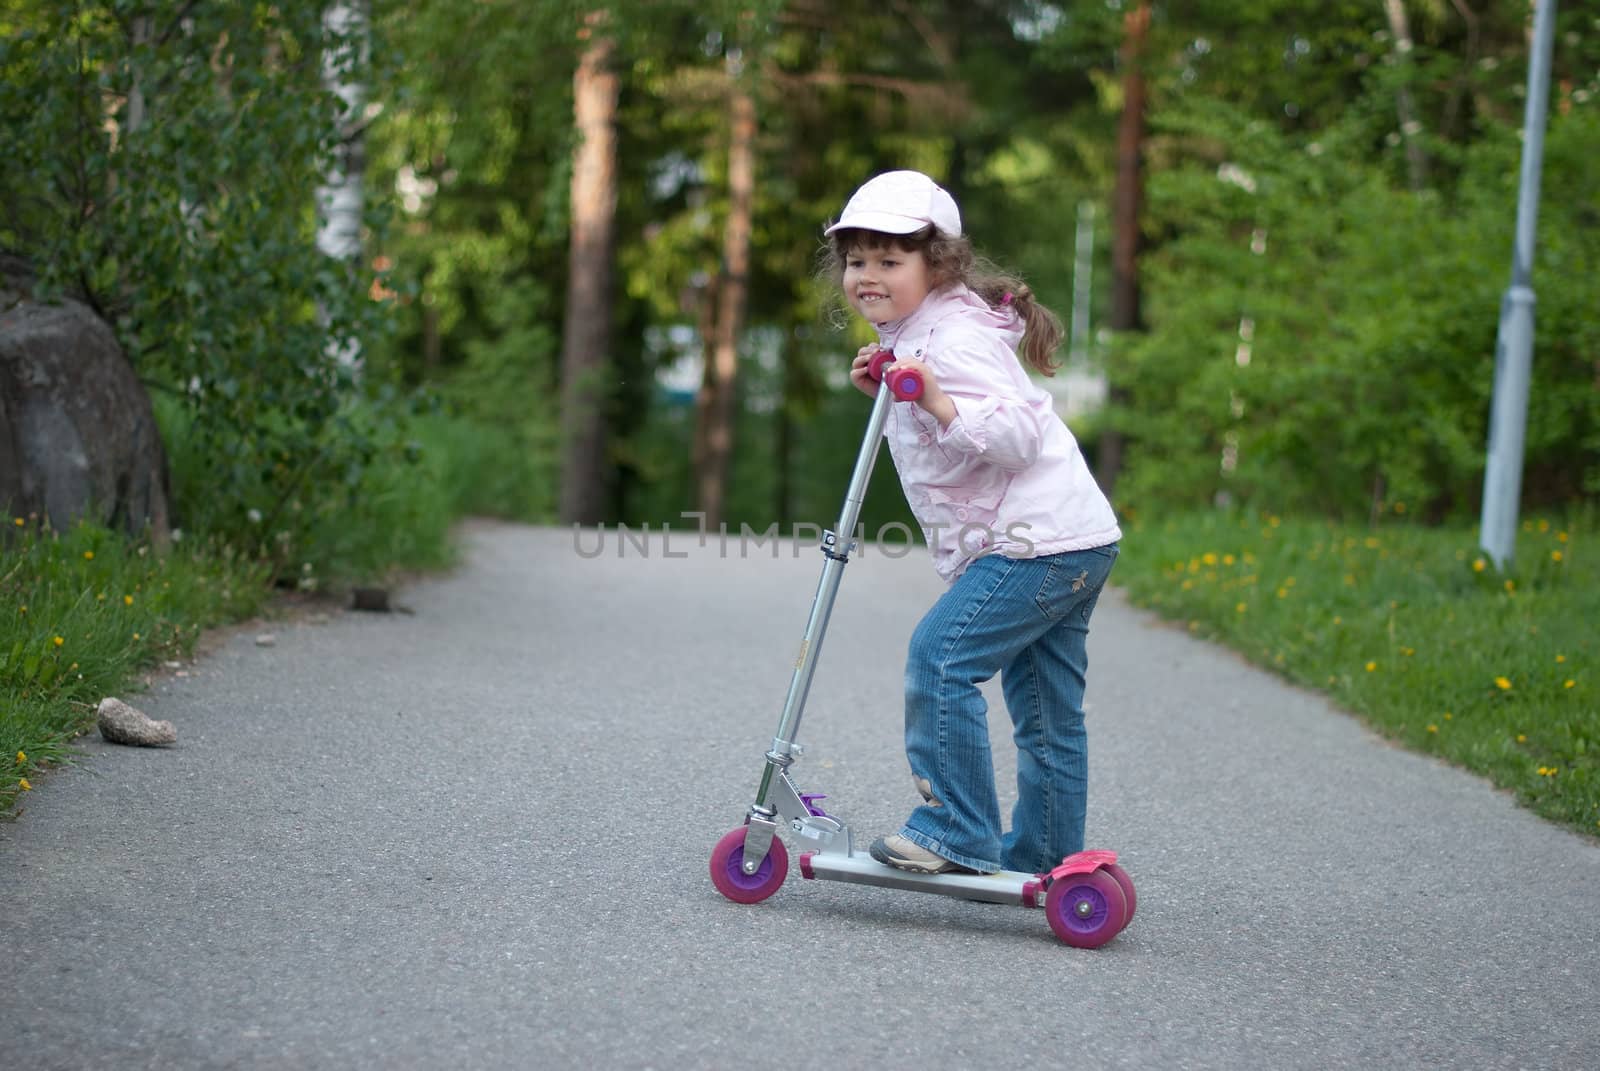 A girl riding a scooter in the park.